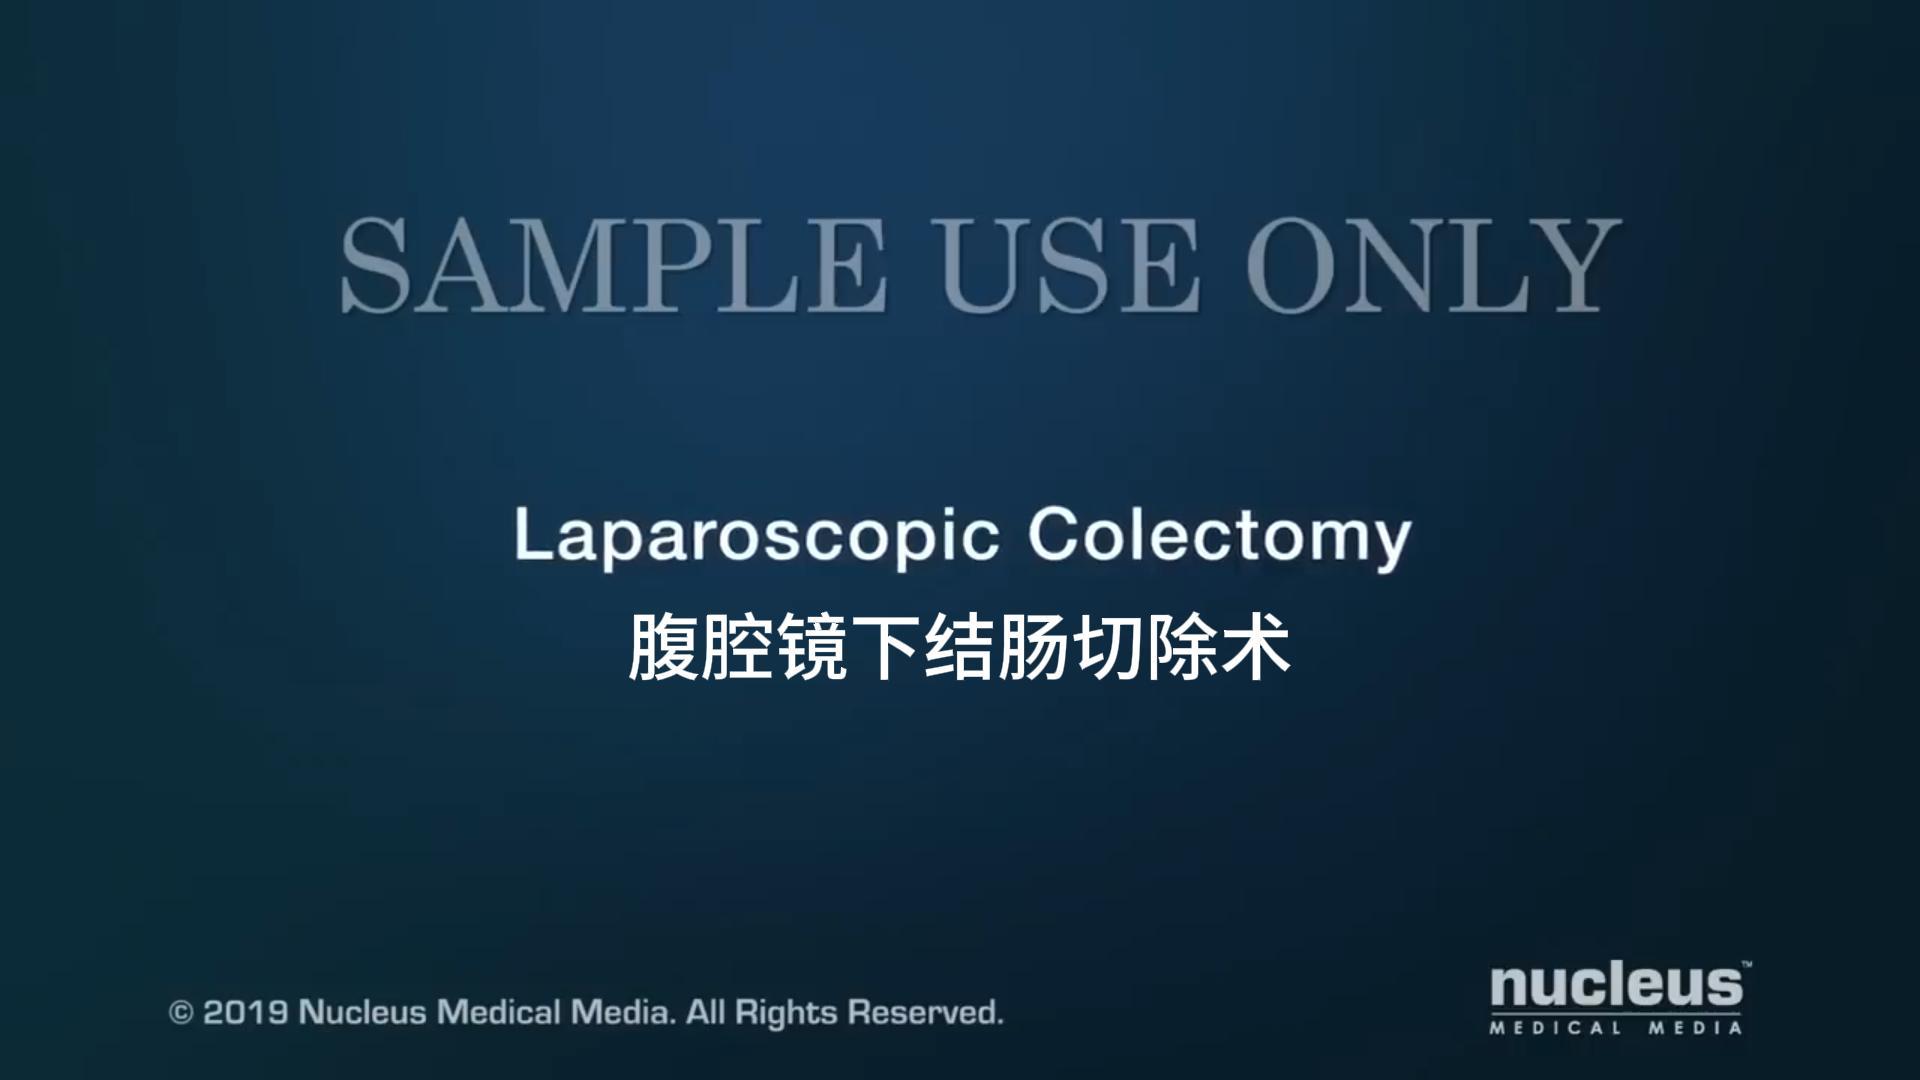 Laparoscopic Colectomy: Minimally Invasive Method for Precise and Clear Surgery